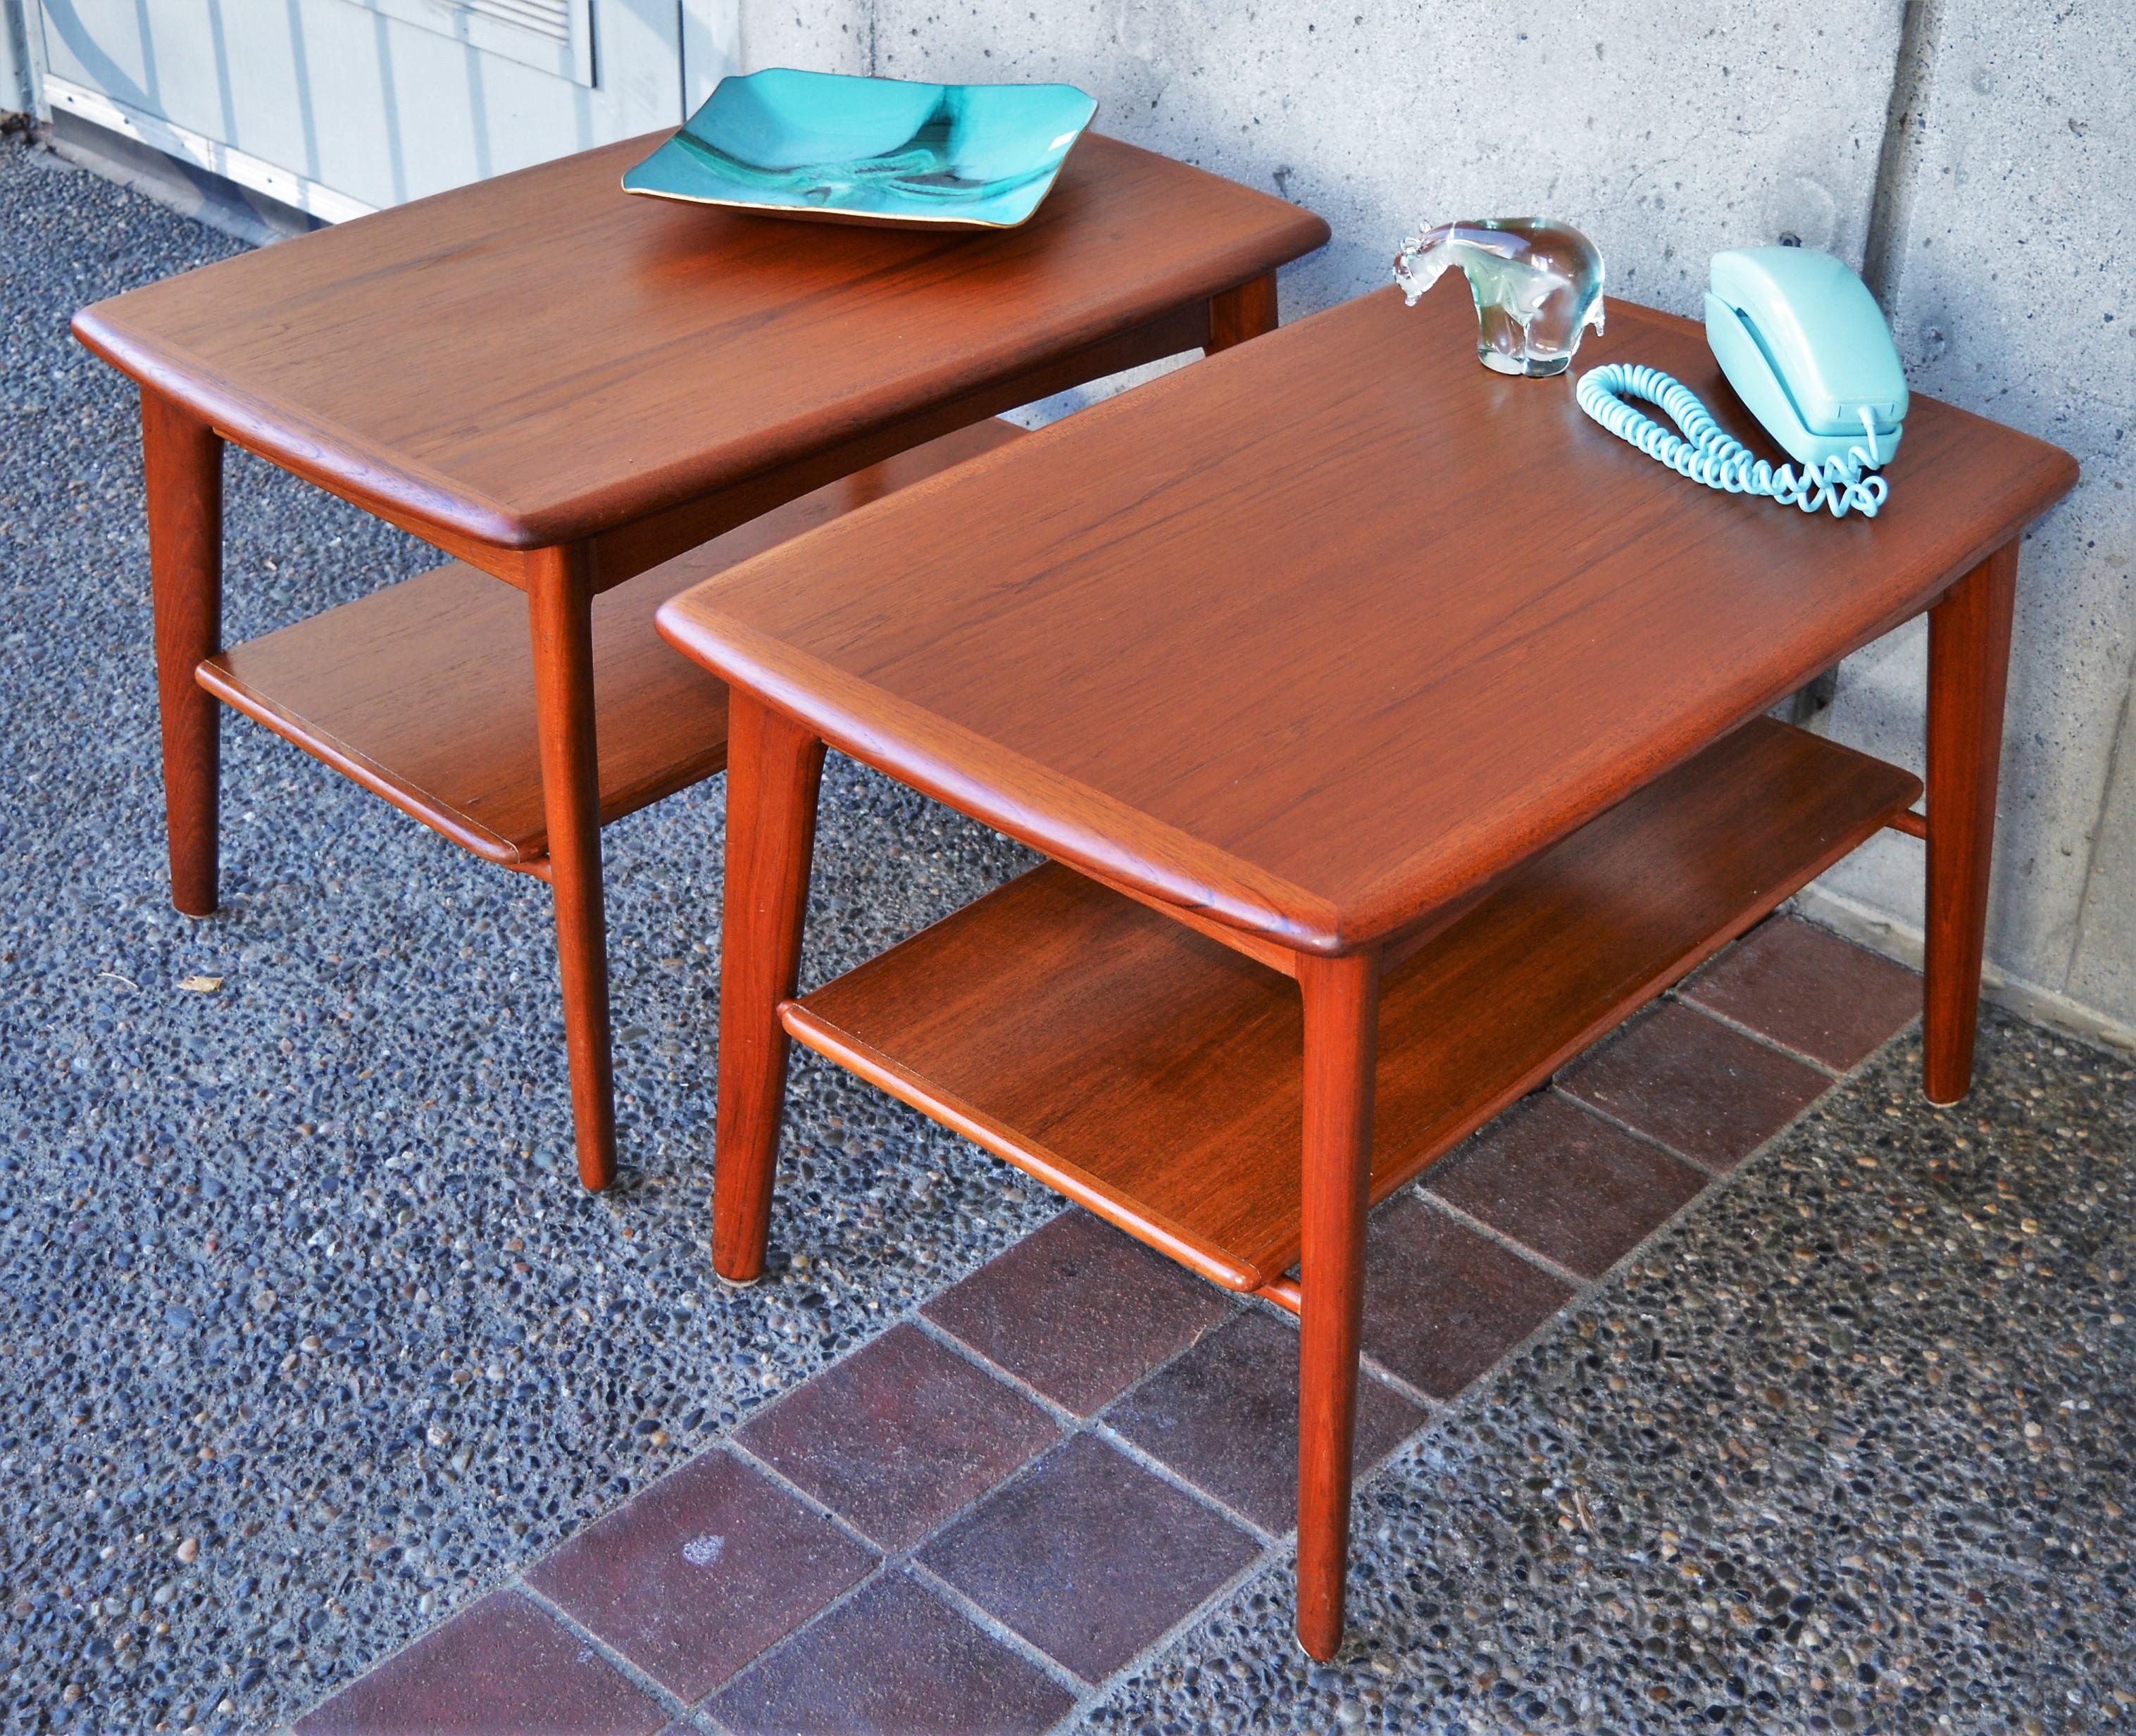 This pair of teak side tables are truly exquisite! Note the impeccable sculptural details throughout, the flared shapes of the table tops, the splayed legs, the sculptural shelf supports etc. Designed by Svend Madsen in the 1960s. Featuring a hidden